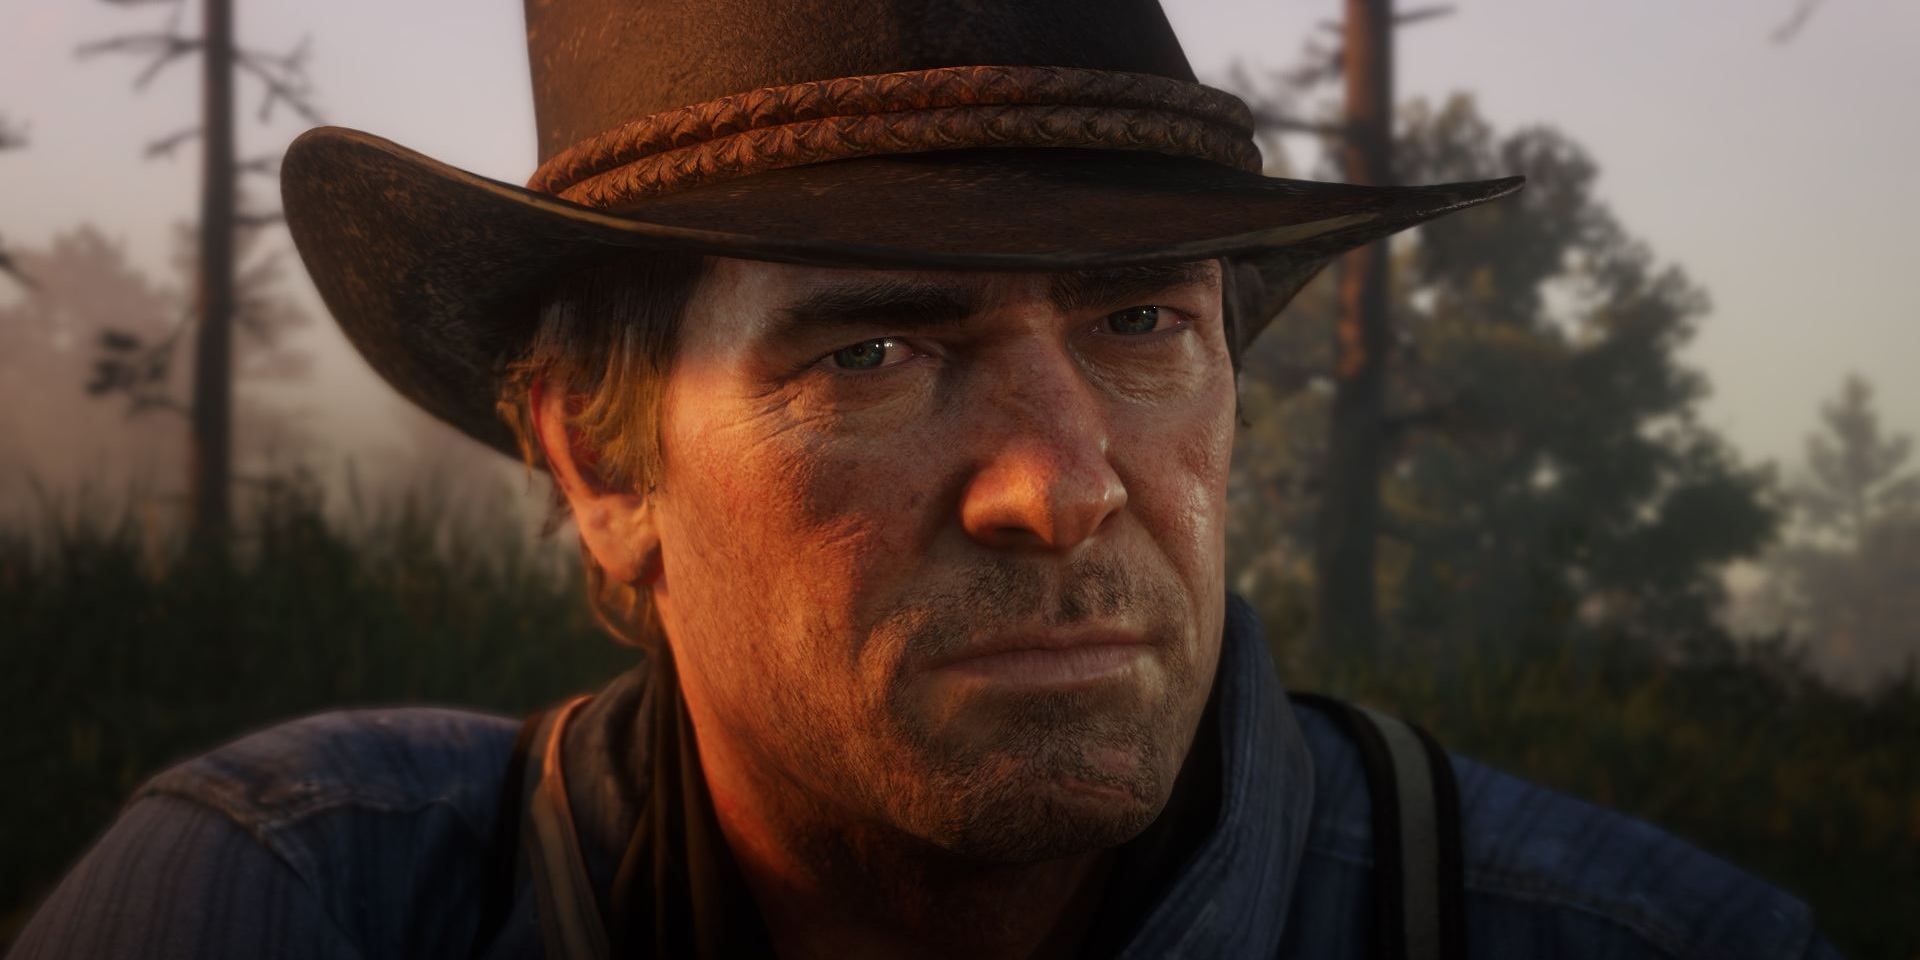 Arthur Morgan looking solemn in RDR2, the sun shining on his right side.